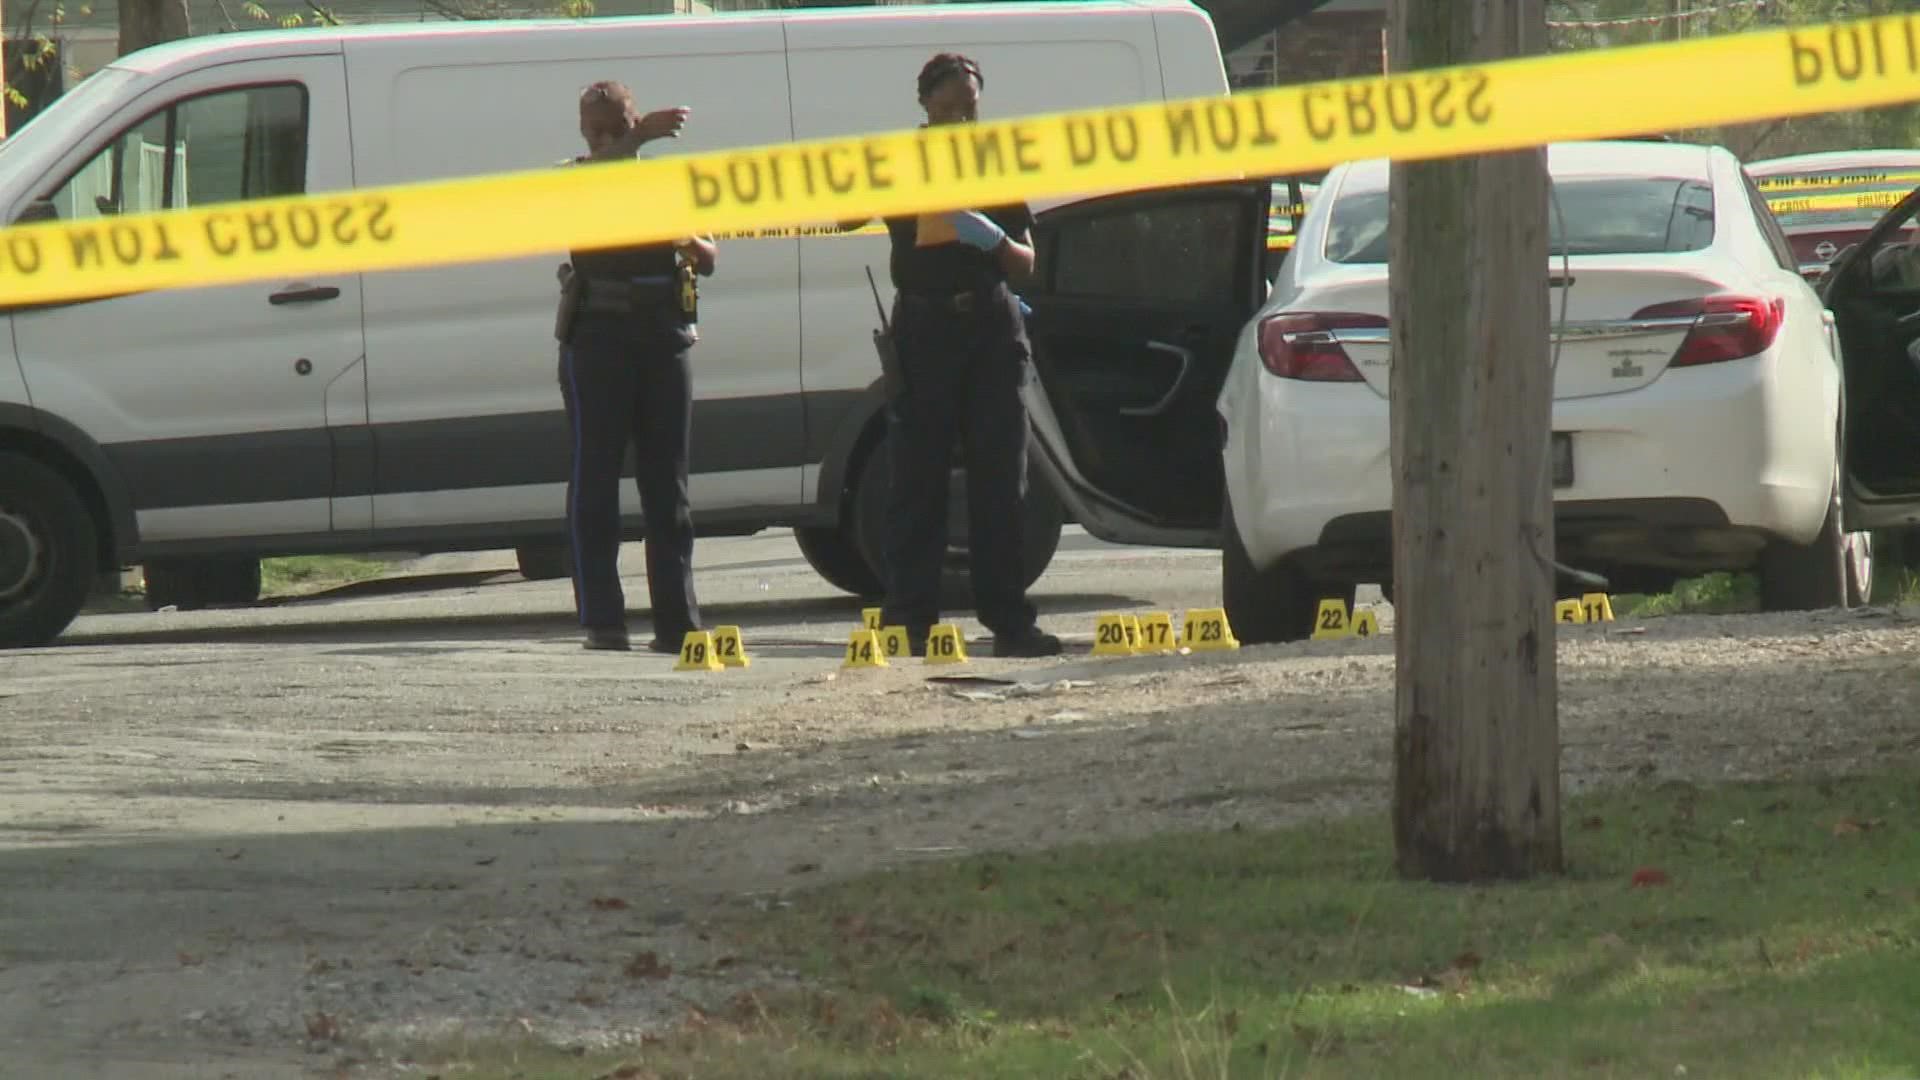 According to New Orleans police, the shooting occurred on St. Anthony Street near N. Galvez Street around 1 p.m.